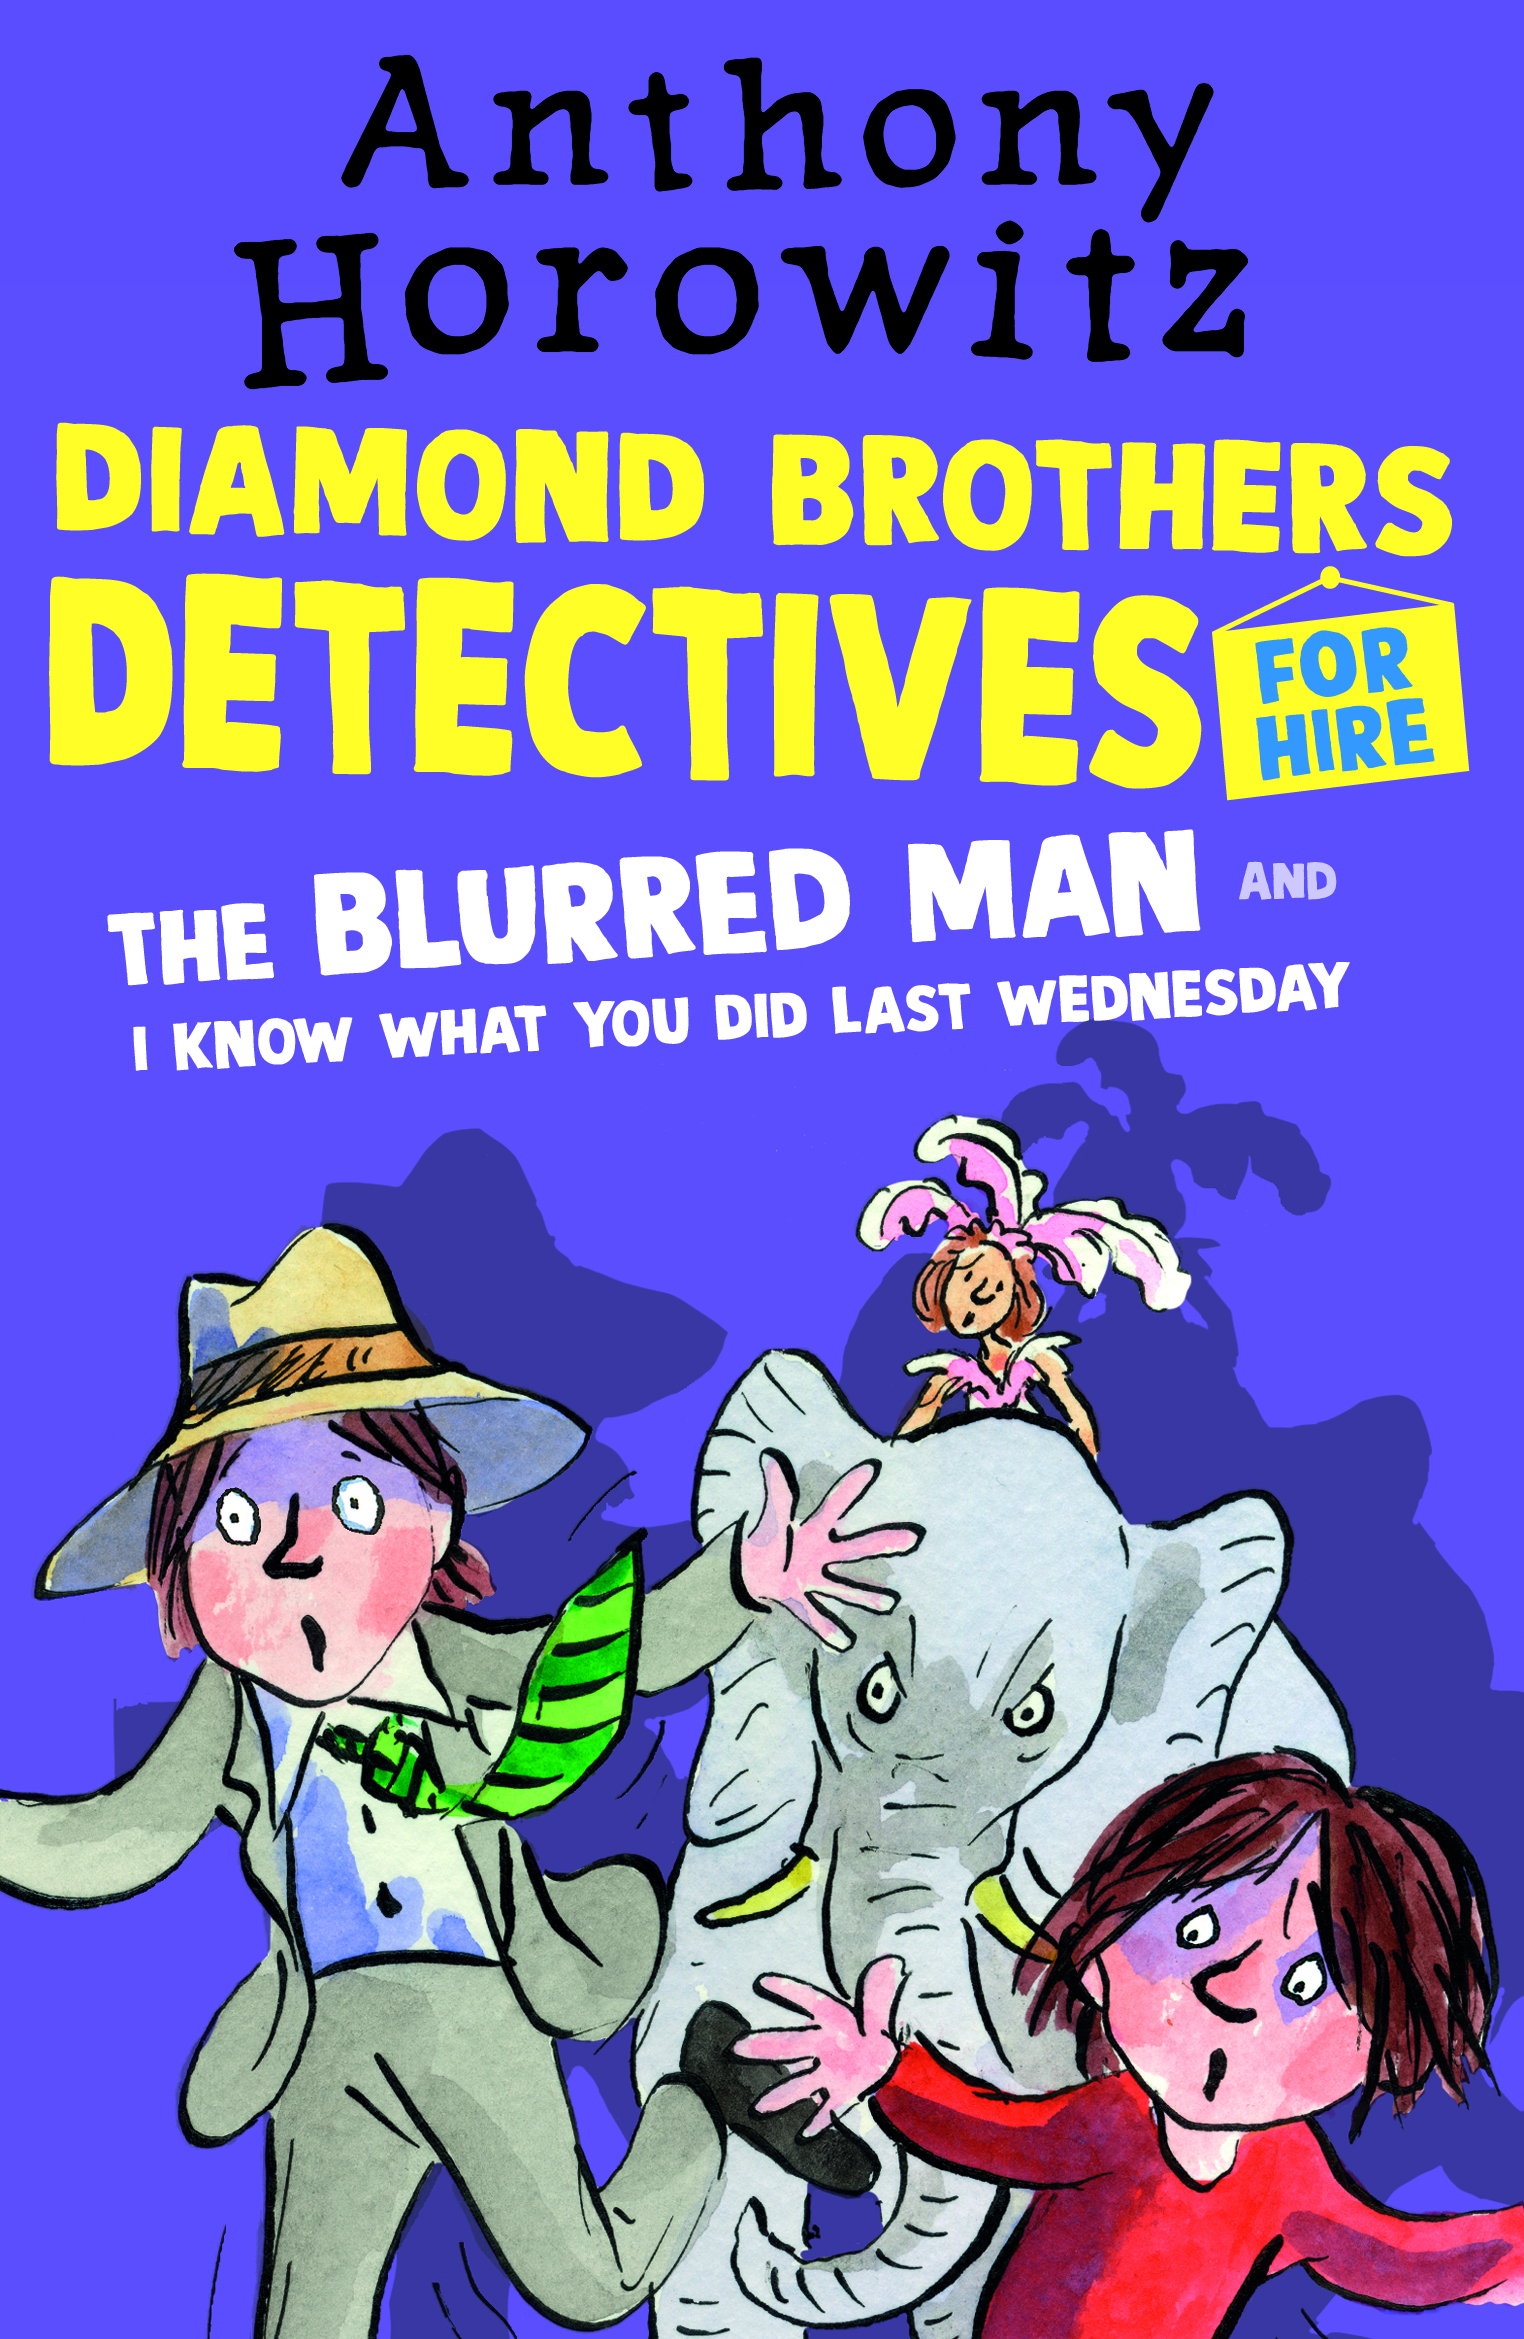 The-Diamond-Brothers-in-The-Blurred-Man-I-Know-What-You-Did-Last-Wednesday